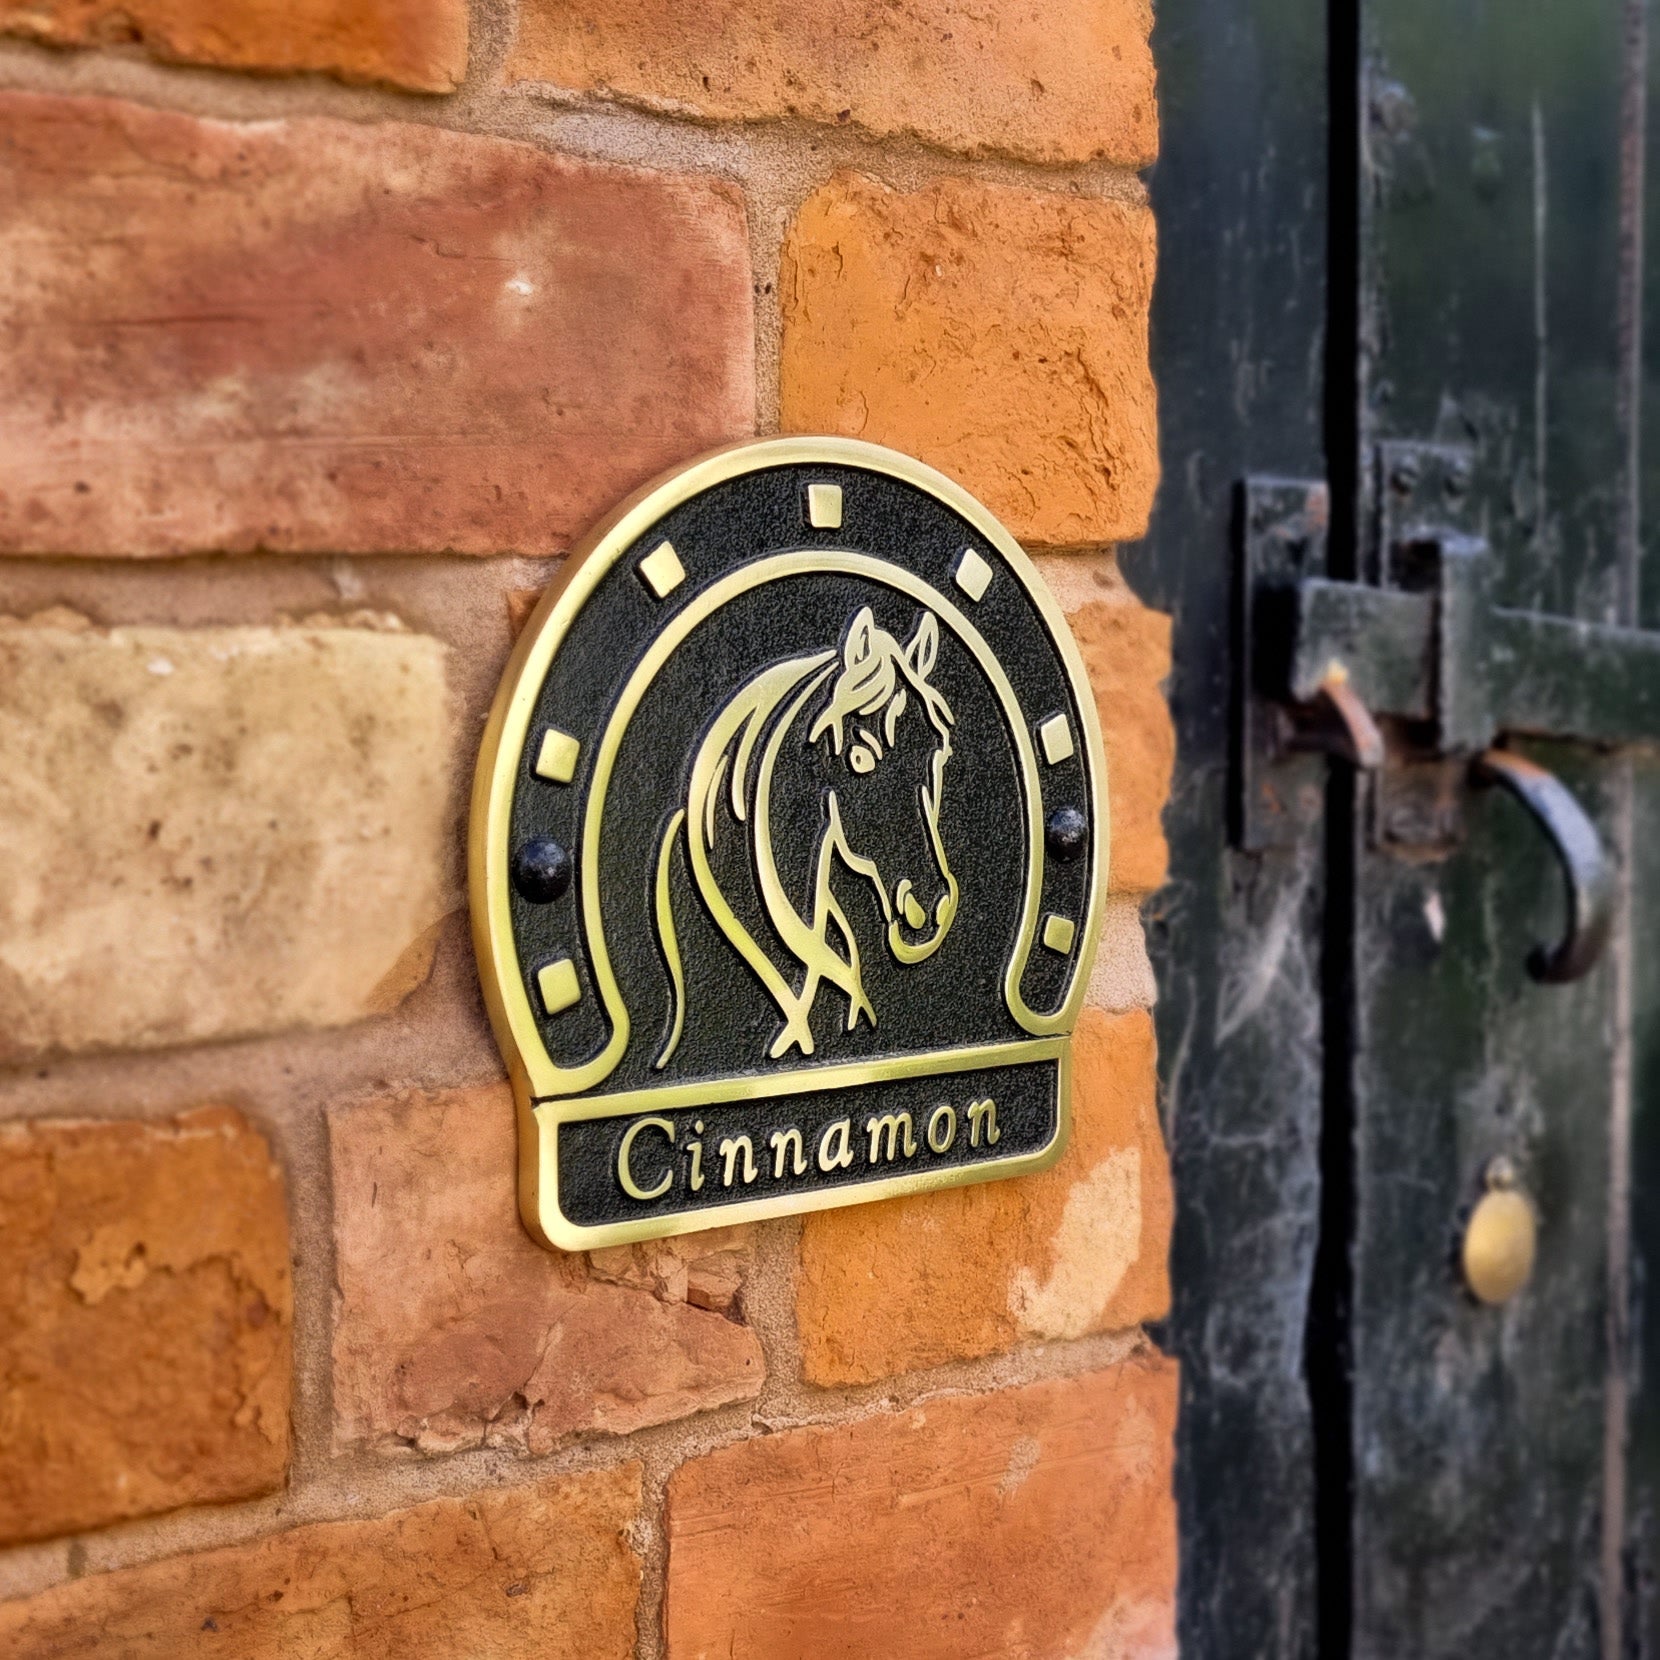 Personalised Stable Plaque - The Metal Foundry